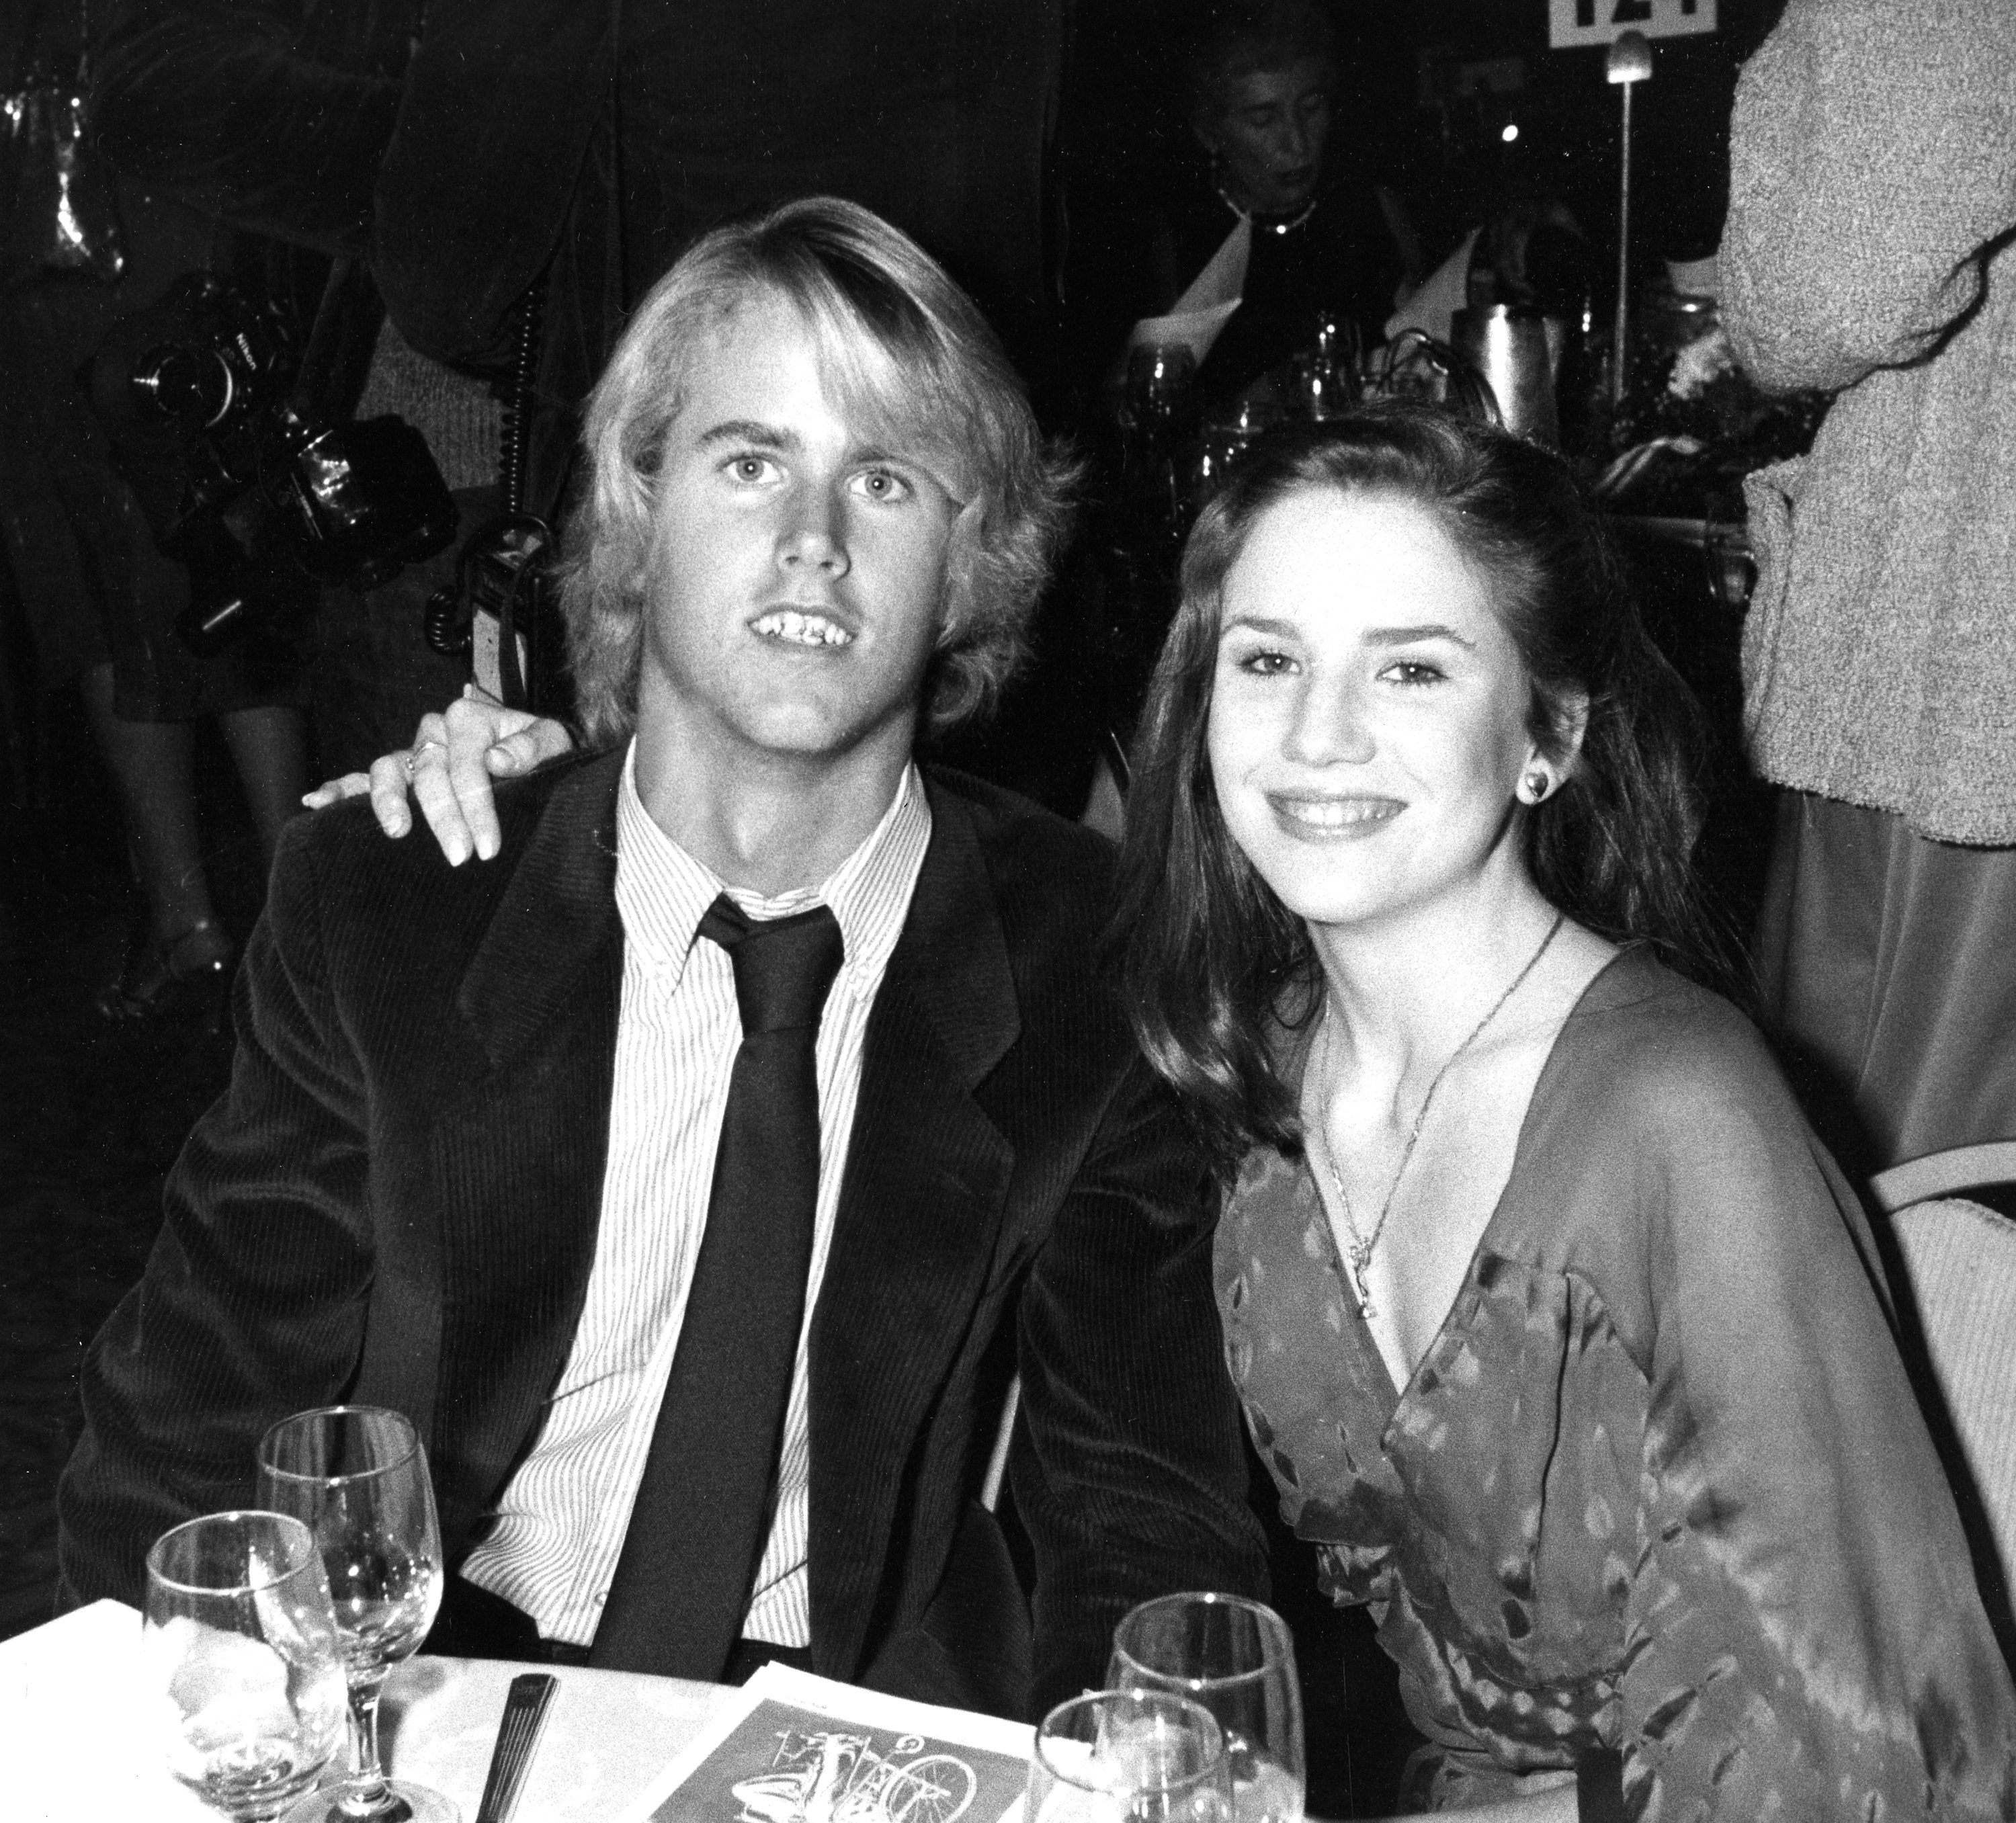 Actor Michael Landon Jr. and Melissa Gilbert attending the Third Annual Media Awards Gala "Changing Attitudes" at the Beverly Hilton Hotel on January 22, 1981 in Beverly Hills, California. | Source: Getty Images